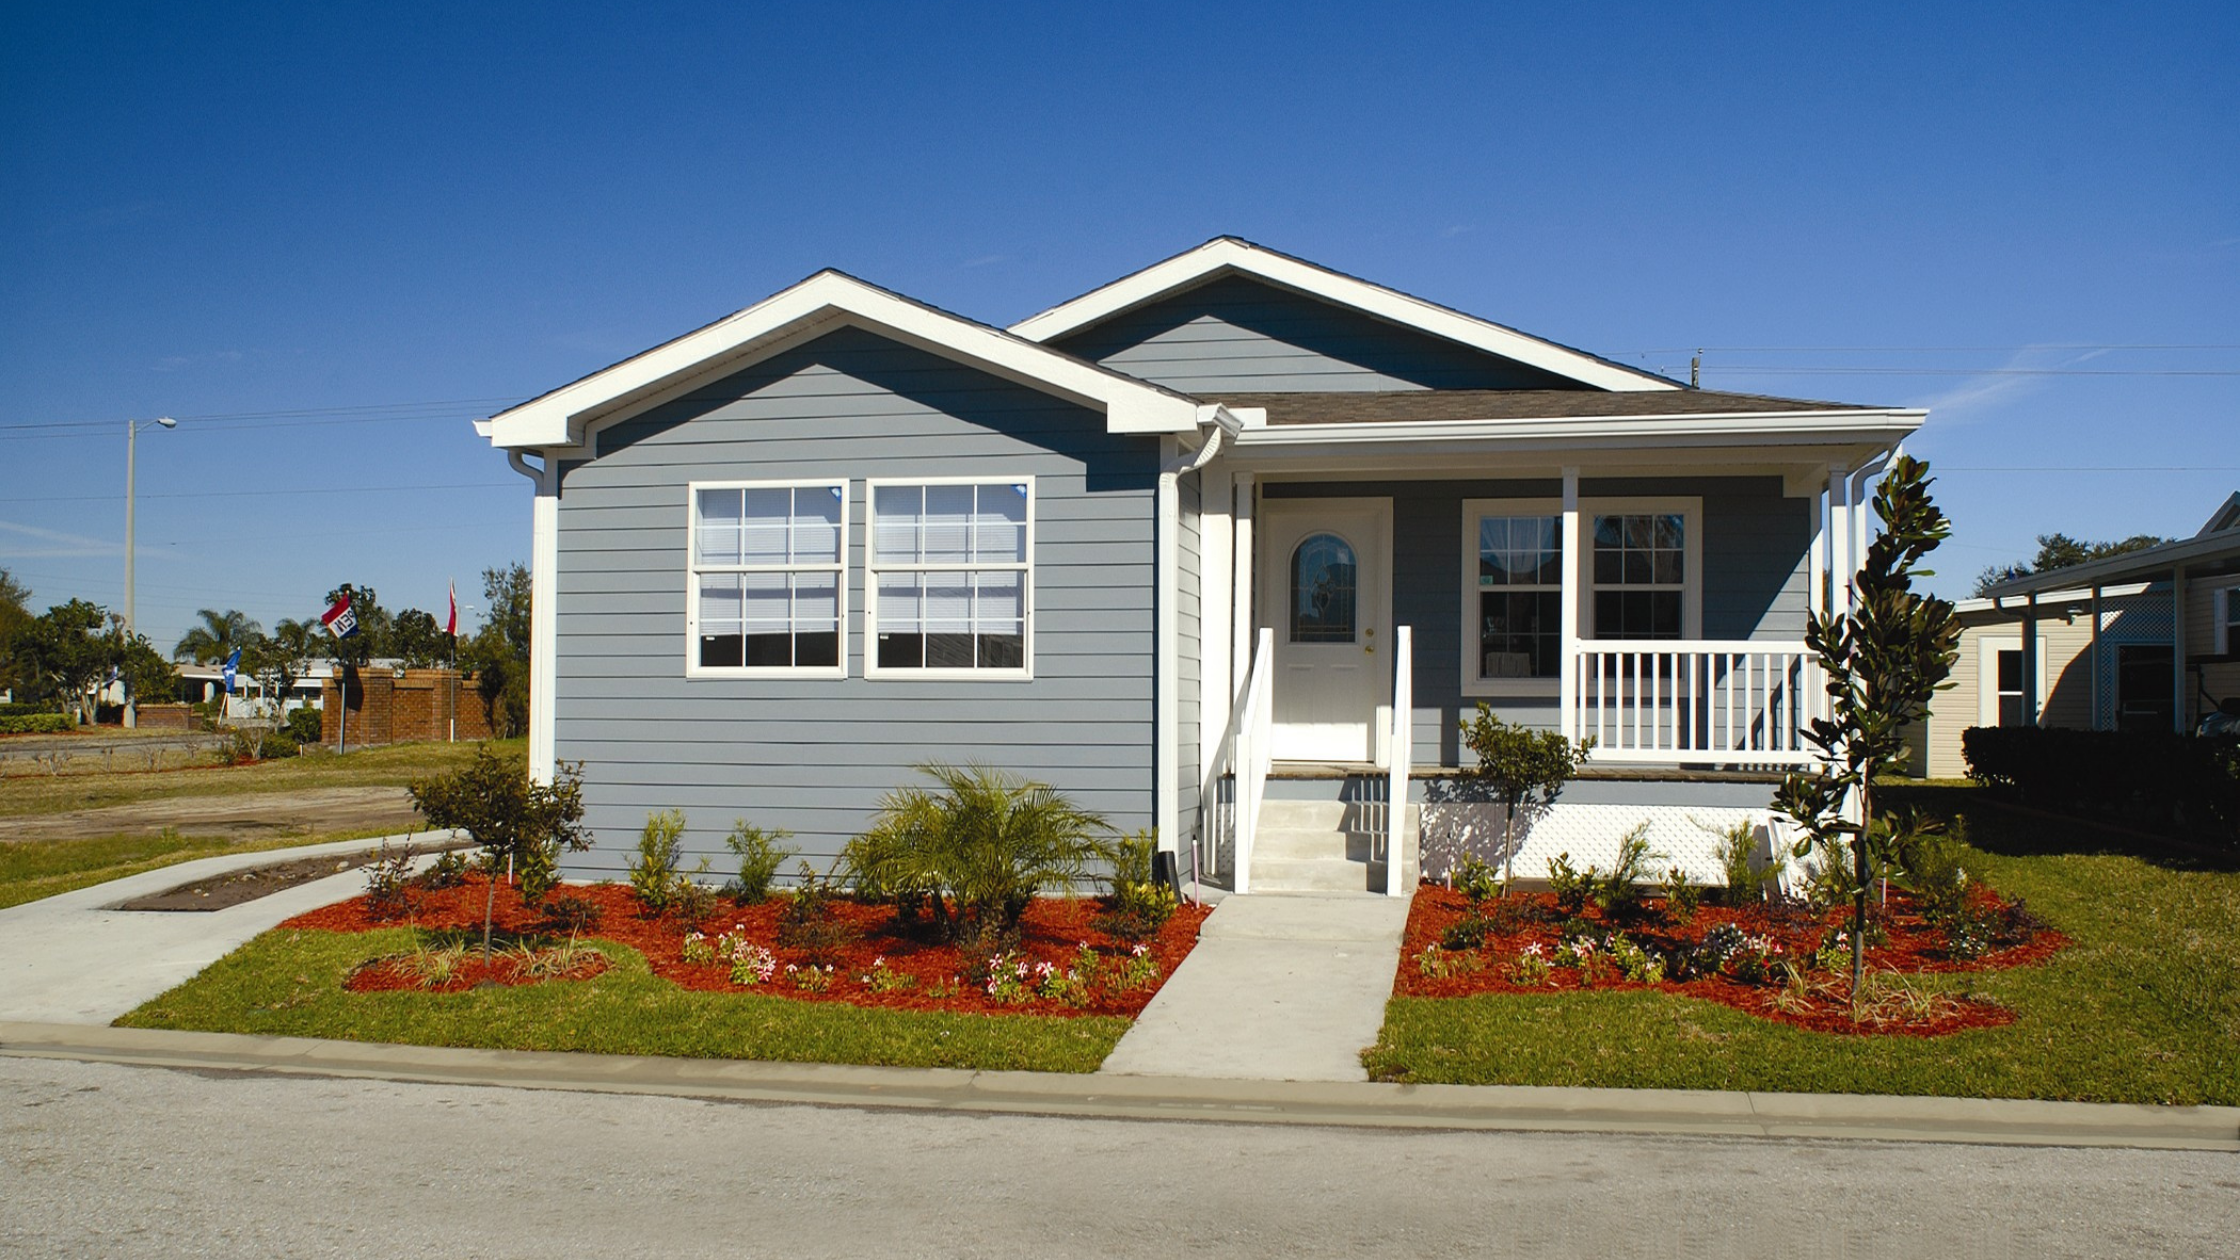 Benefits to Owning a Manufactured Home